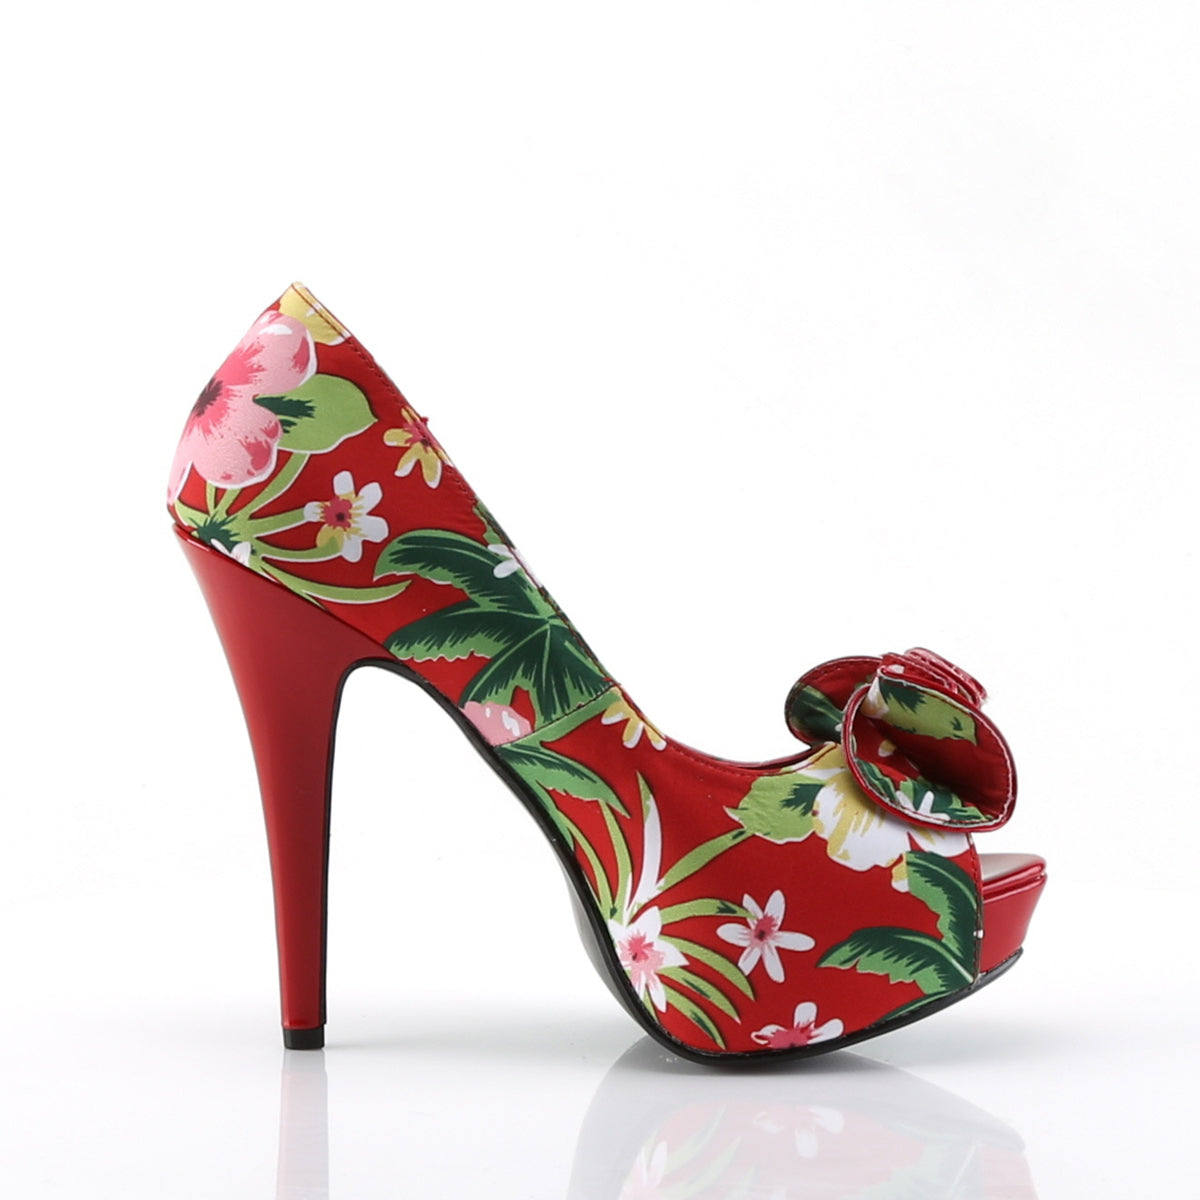 LOLITA-11 Retro Glamour Pin Up Couture Platforms Red Floral Print Fabric